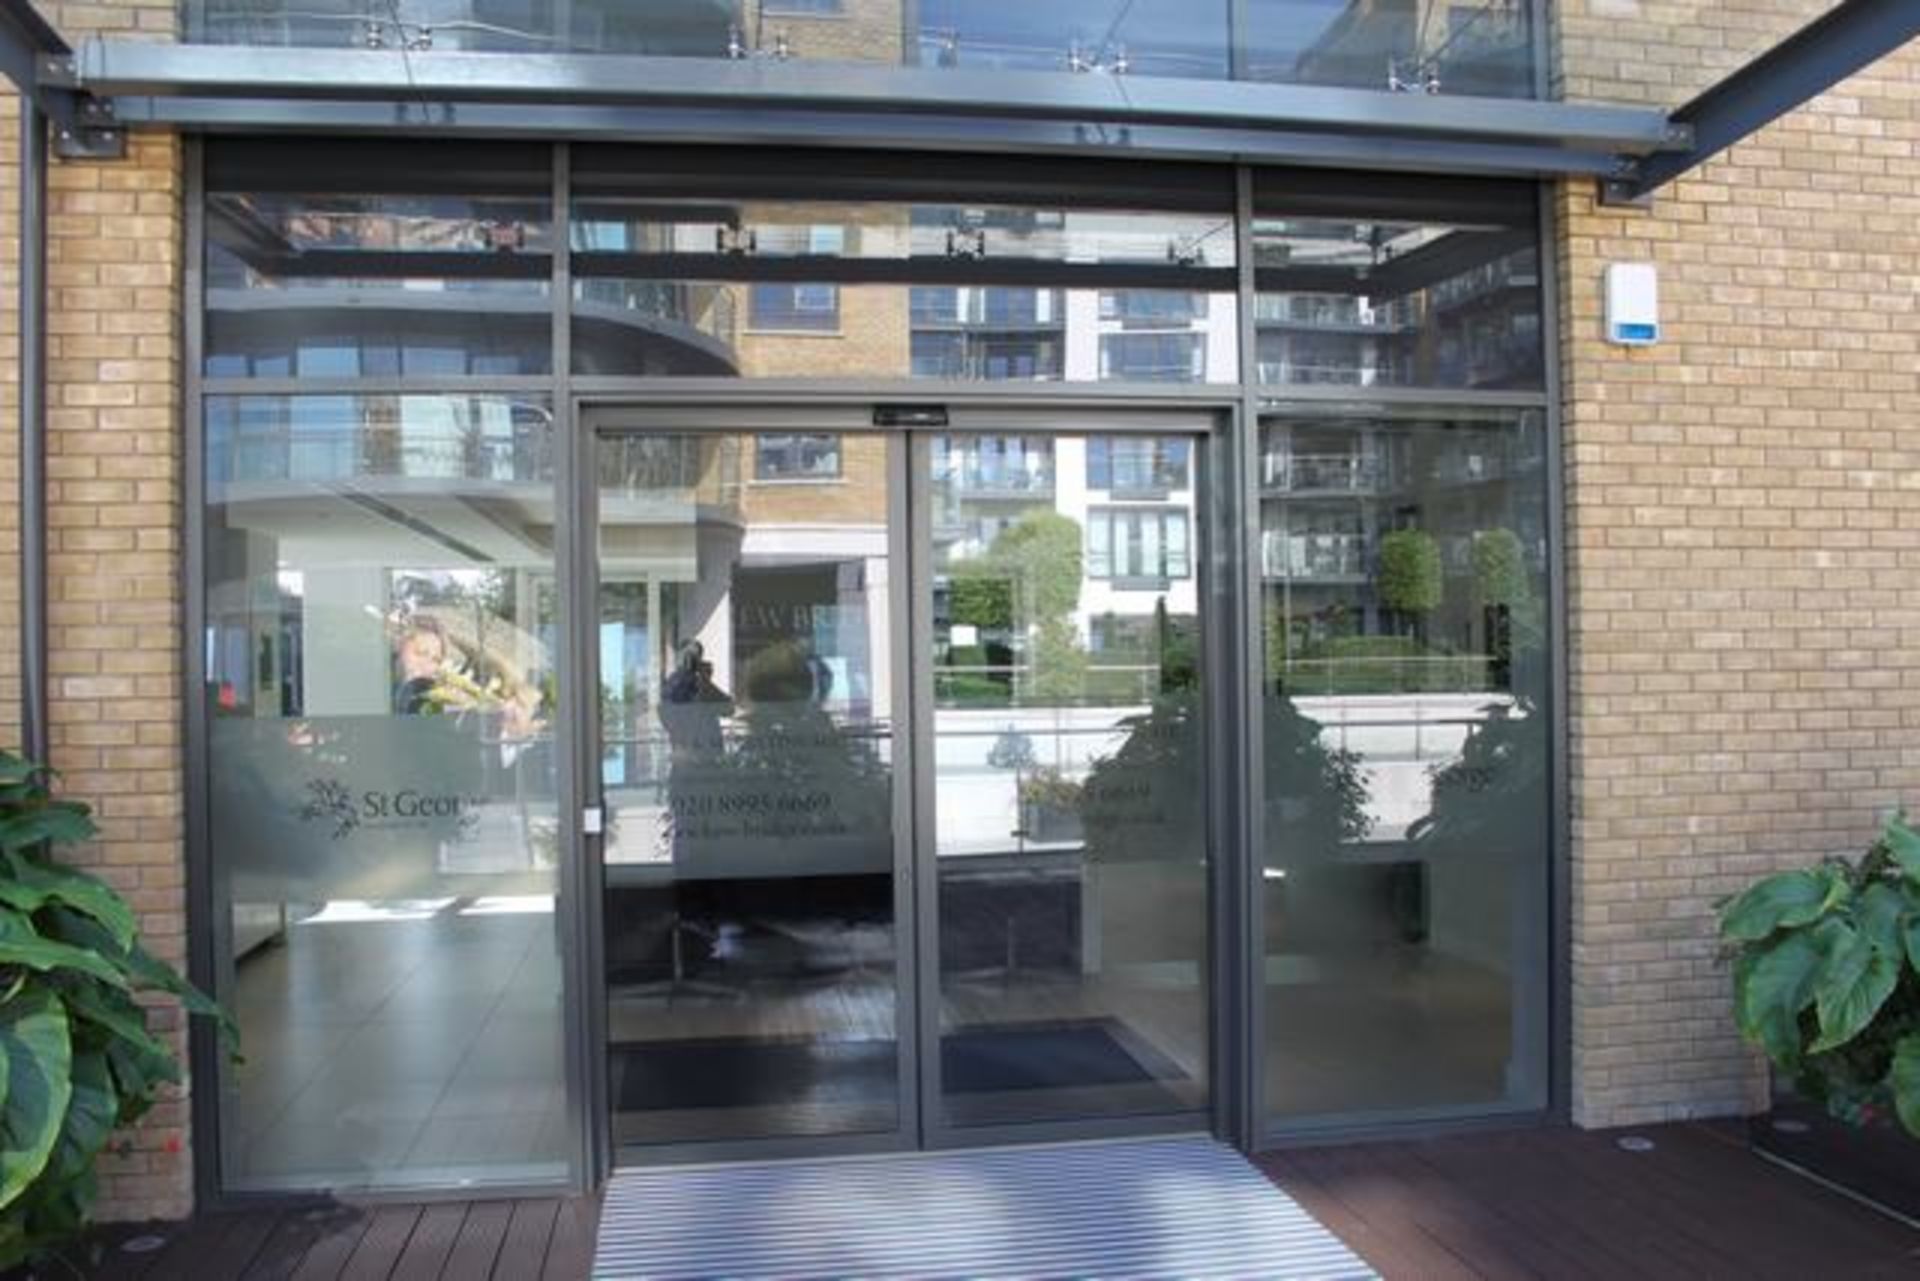 A pair of glass sliding external door s with Geze sliding door system automation comprises of a